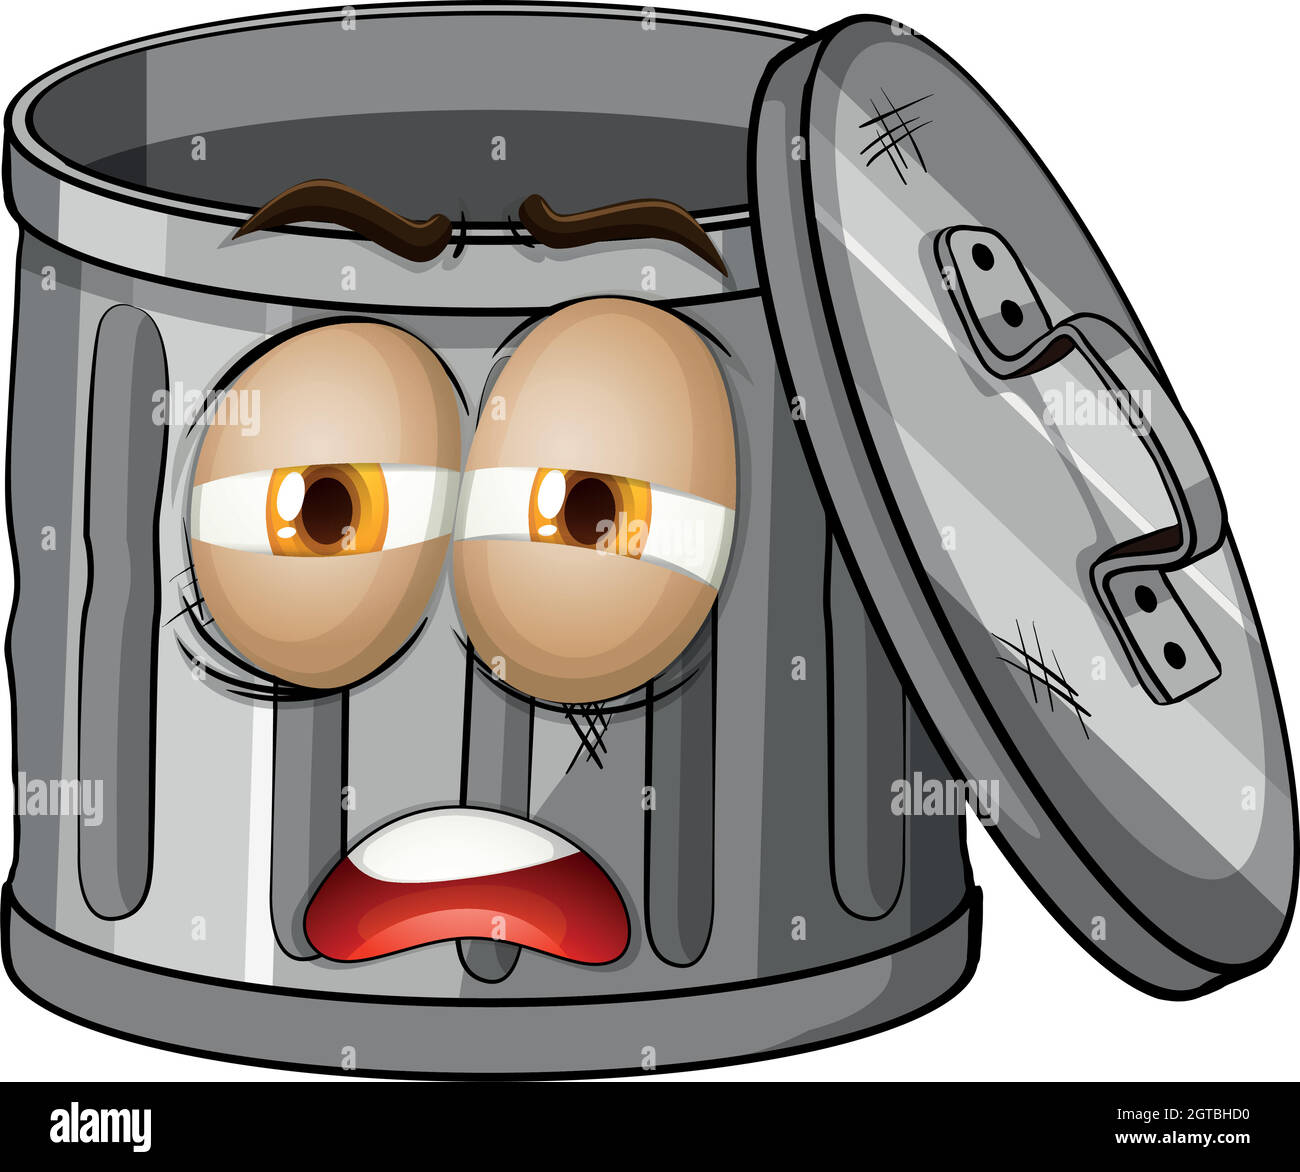 Trashcan with sad face Stock Vector